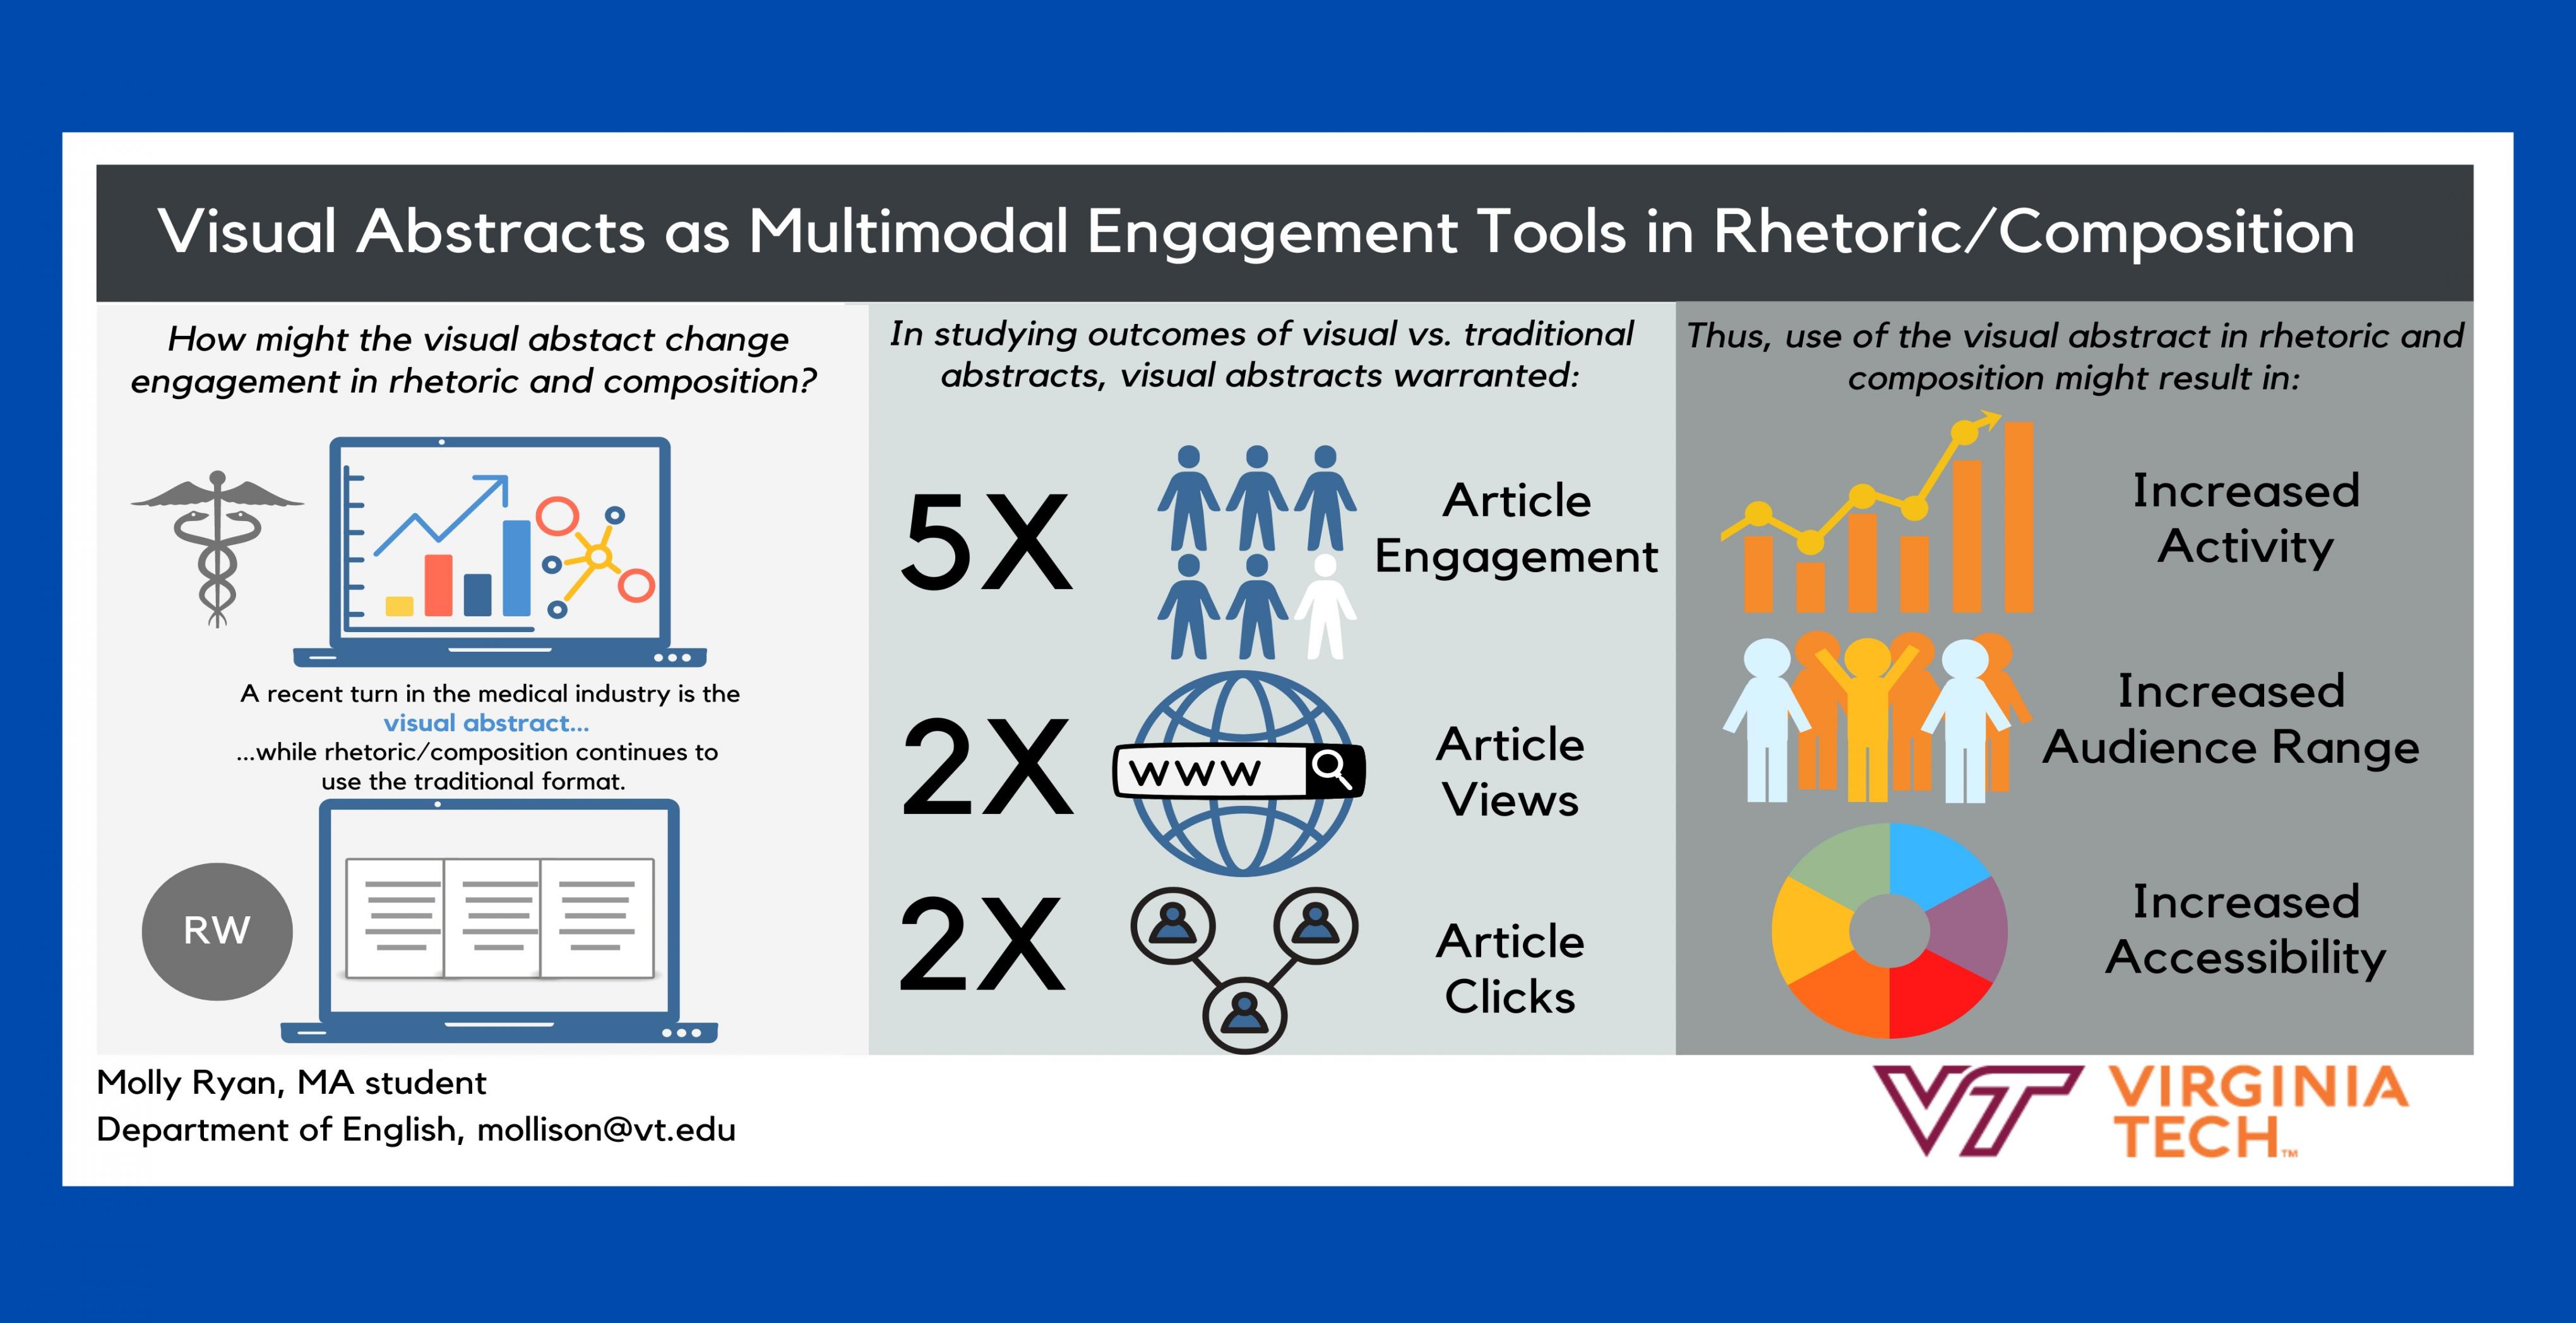 a three panel visual abstract. Panel 1: two laptops with depictions of graphics and blank text. Panel 2: outcomes, with five times article engagement, two times article views, and two times article clicks. Panel 3: implications, including increased activity, increased audience range, and increased accessibility.